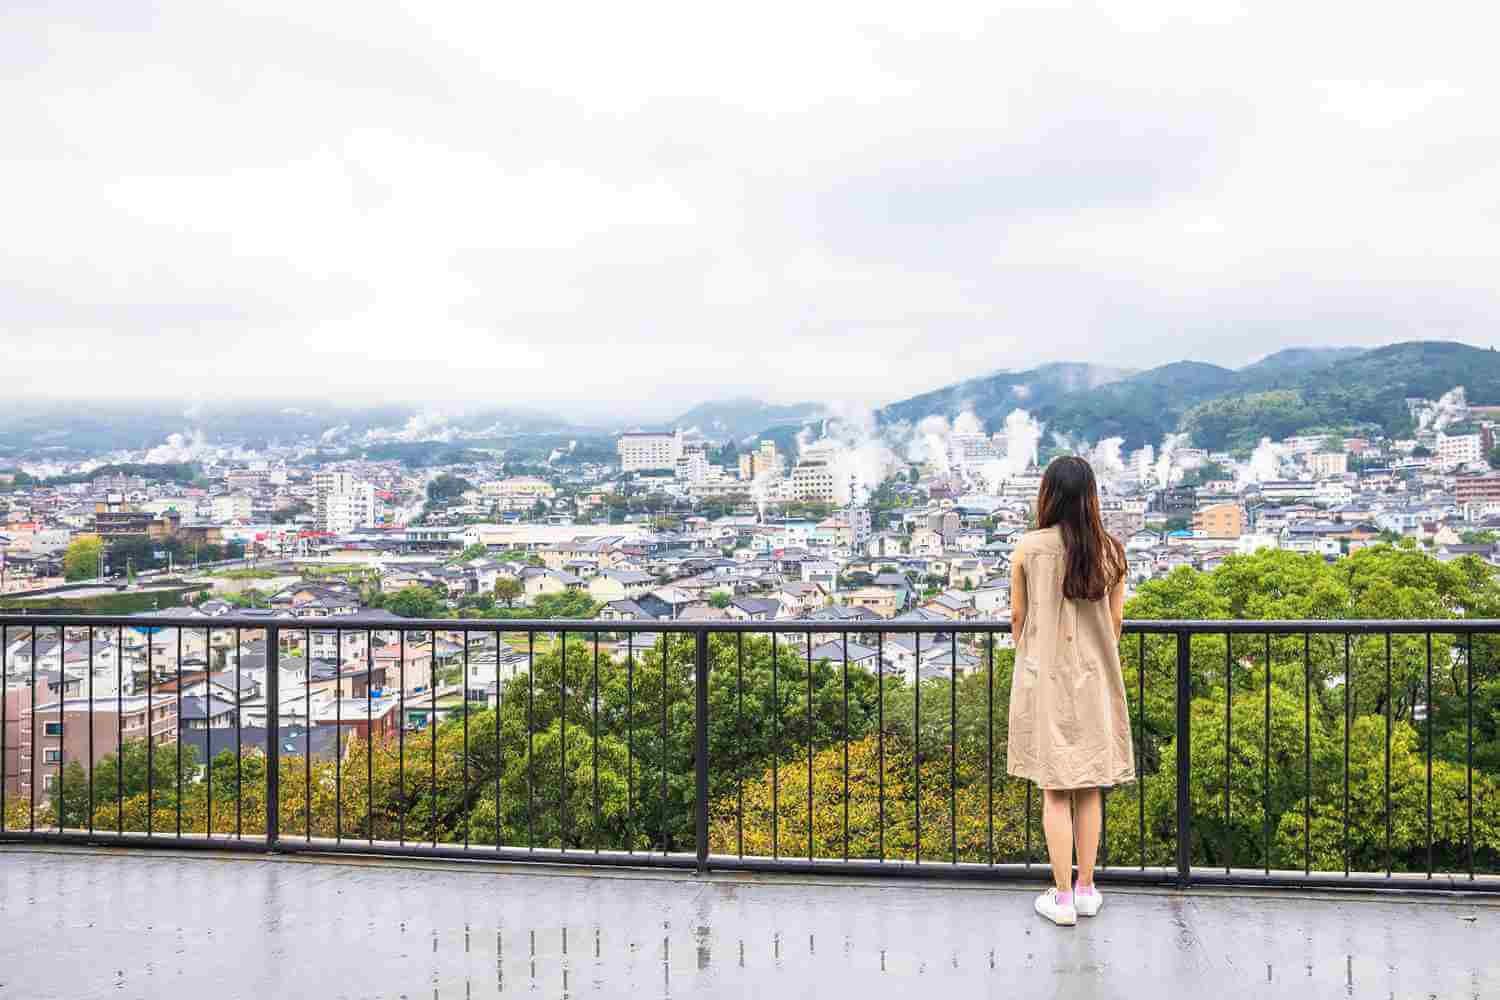  Female tourists at the viewpoint of Beppu, Japan's No. 1 hot spring town, a city with Steam drifted from public baths and ryokan onsen